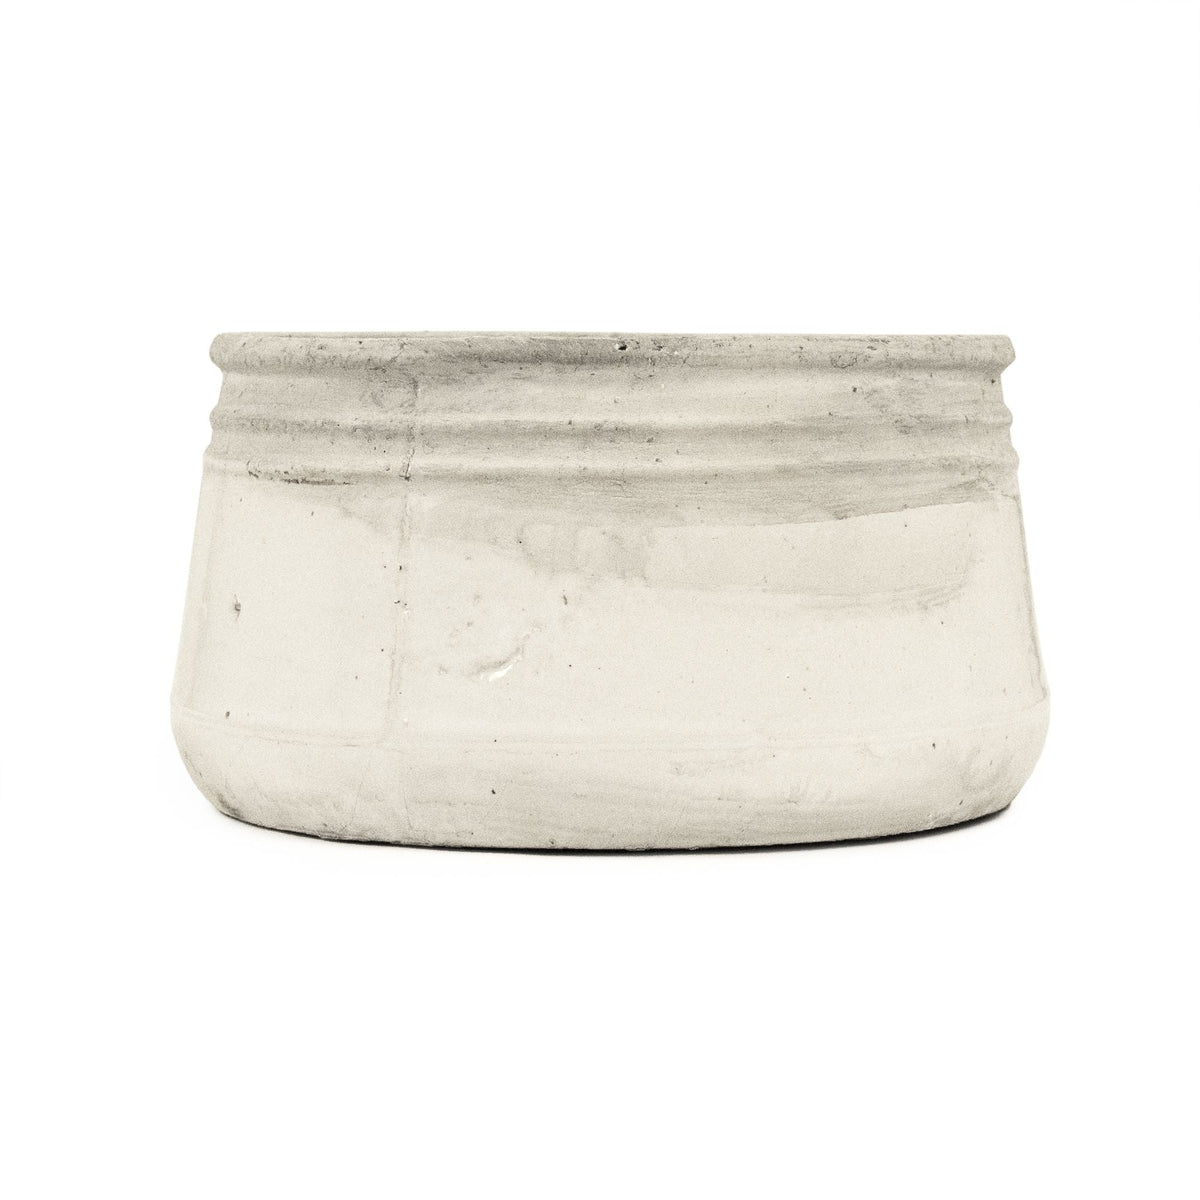 Distressed White Bowl (10041S A25A) by Zentique